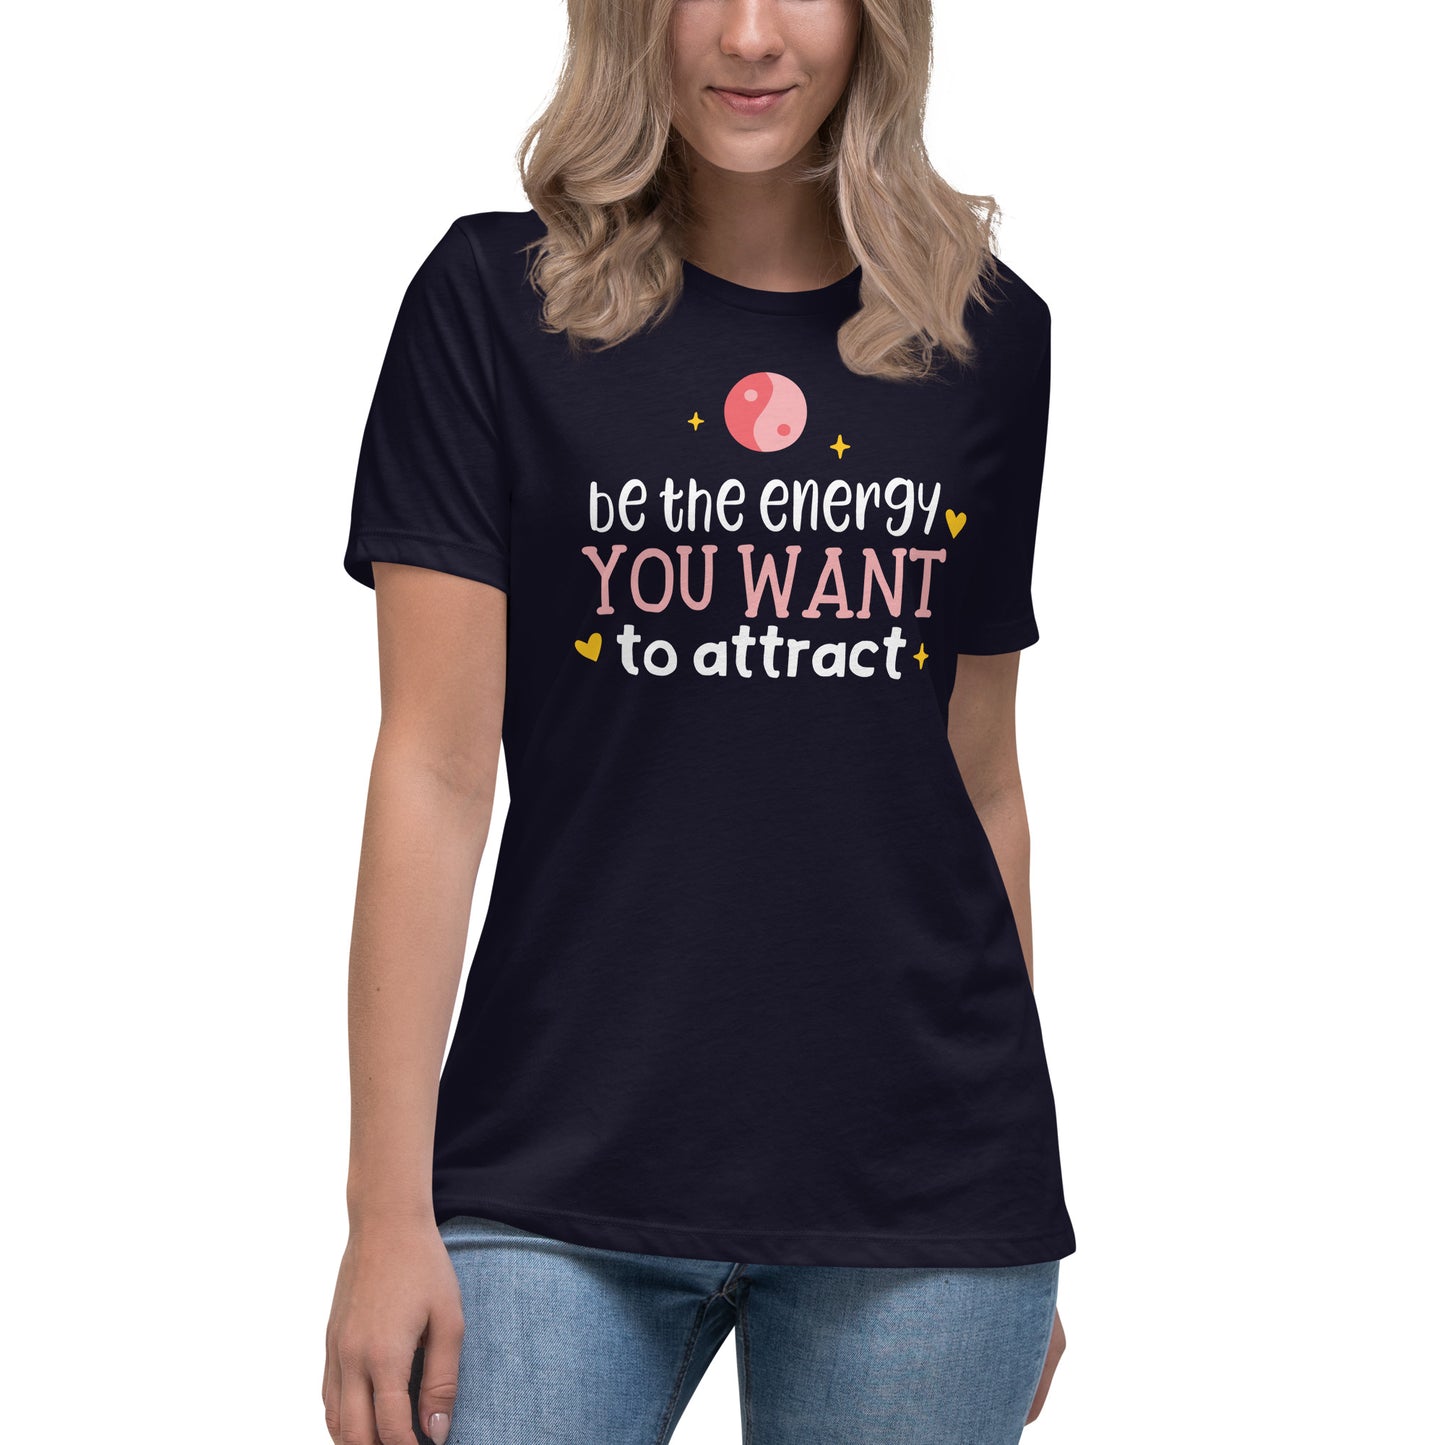 Be the Energy you Want to Attract - Hilarious Yoga Shirts for the Ultimate Yoga Lover!